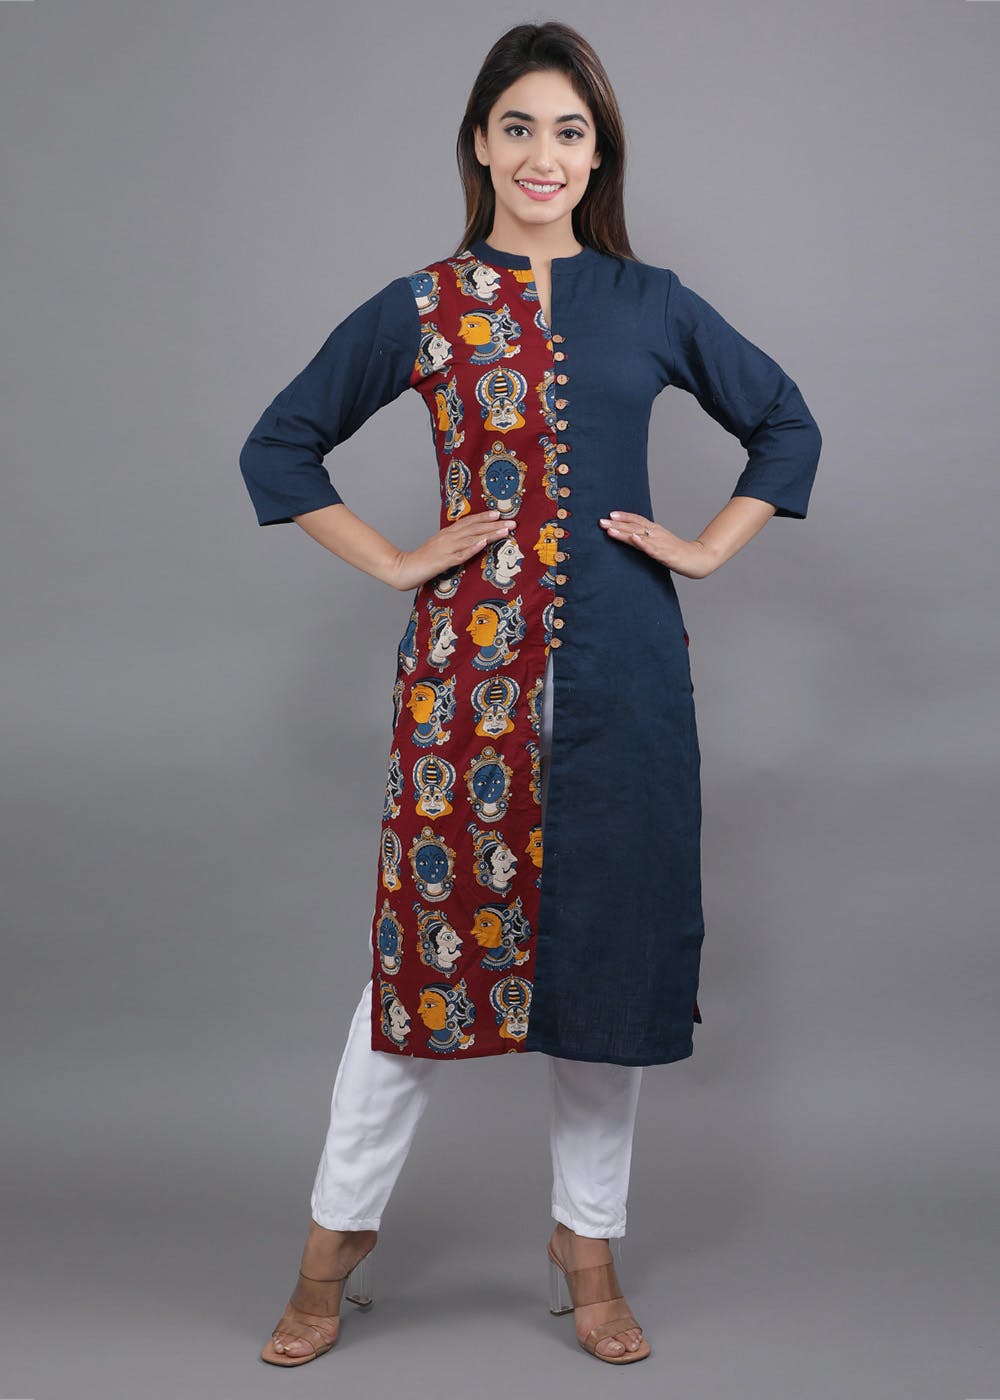 10 Tips To Look Attractive And Slim In Long Kurtis - KALKI Fashion Blog